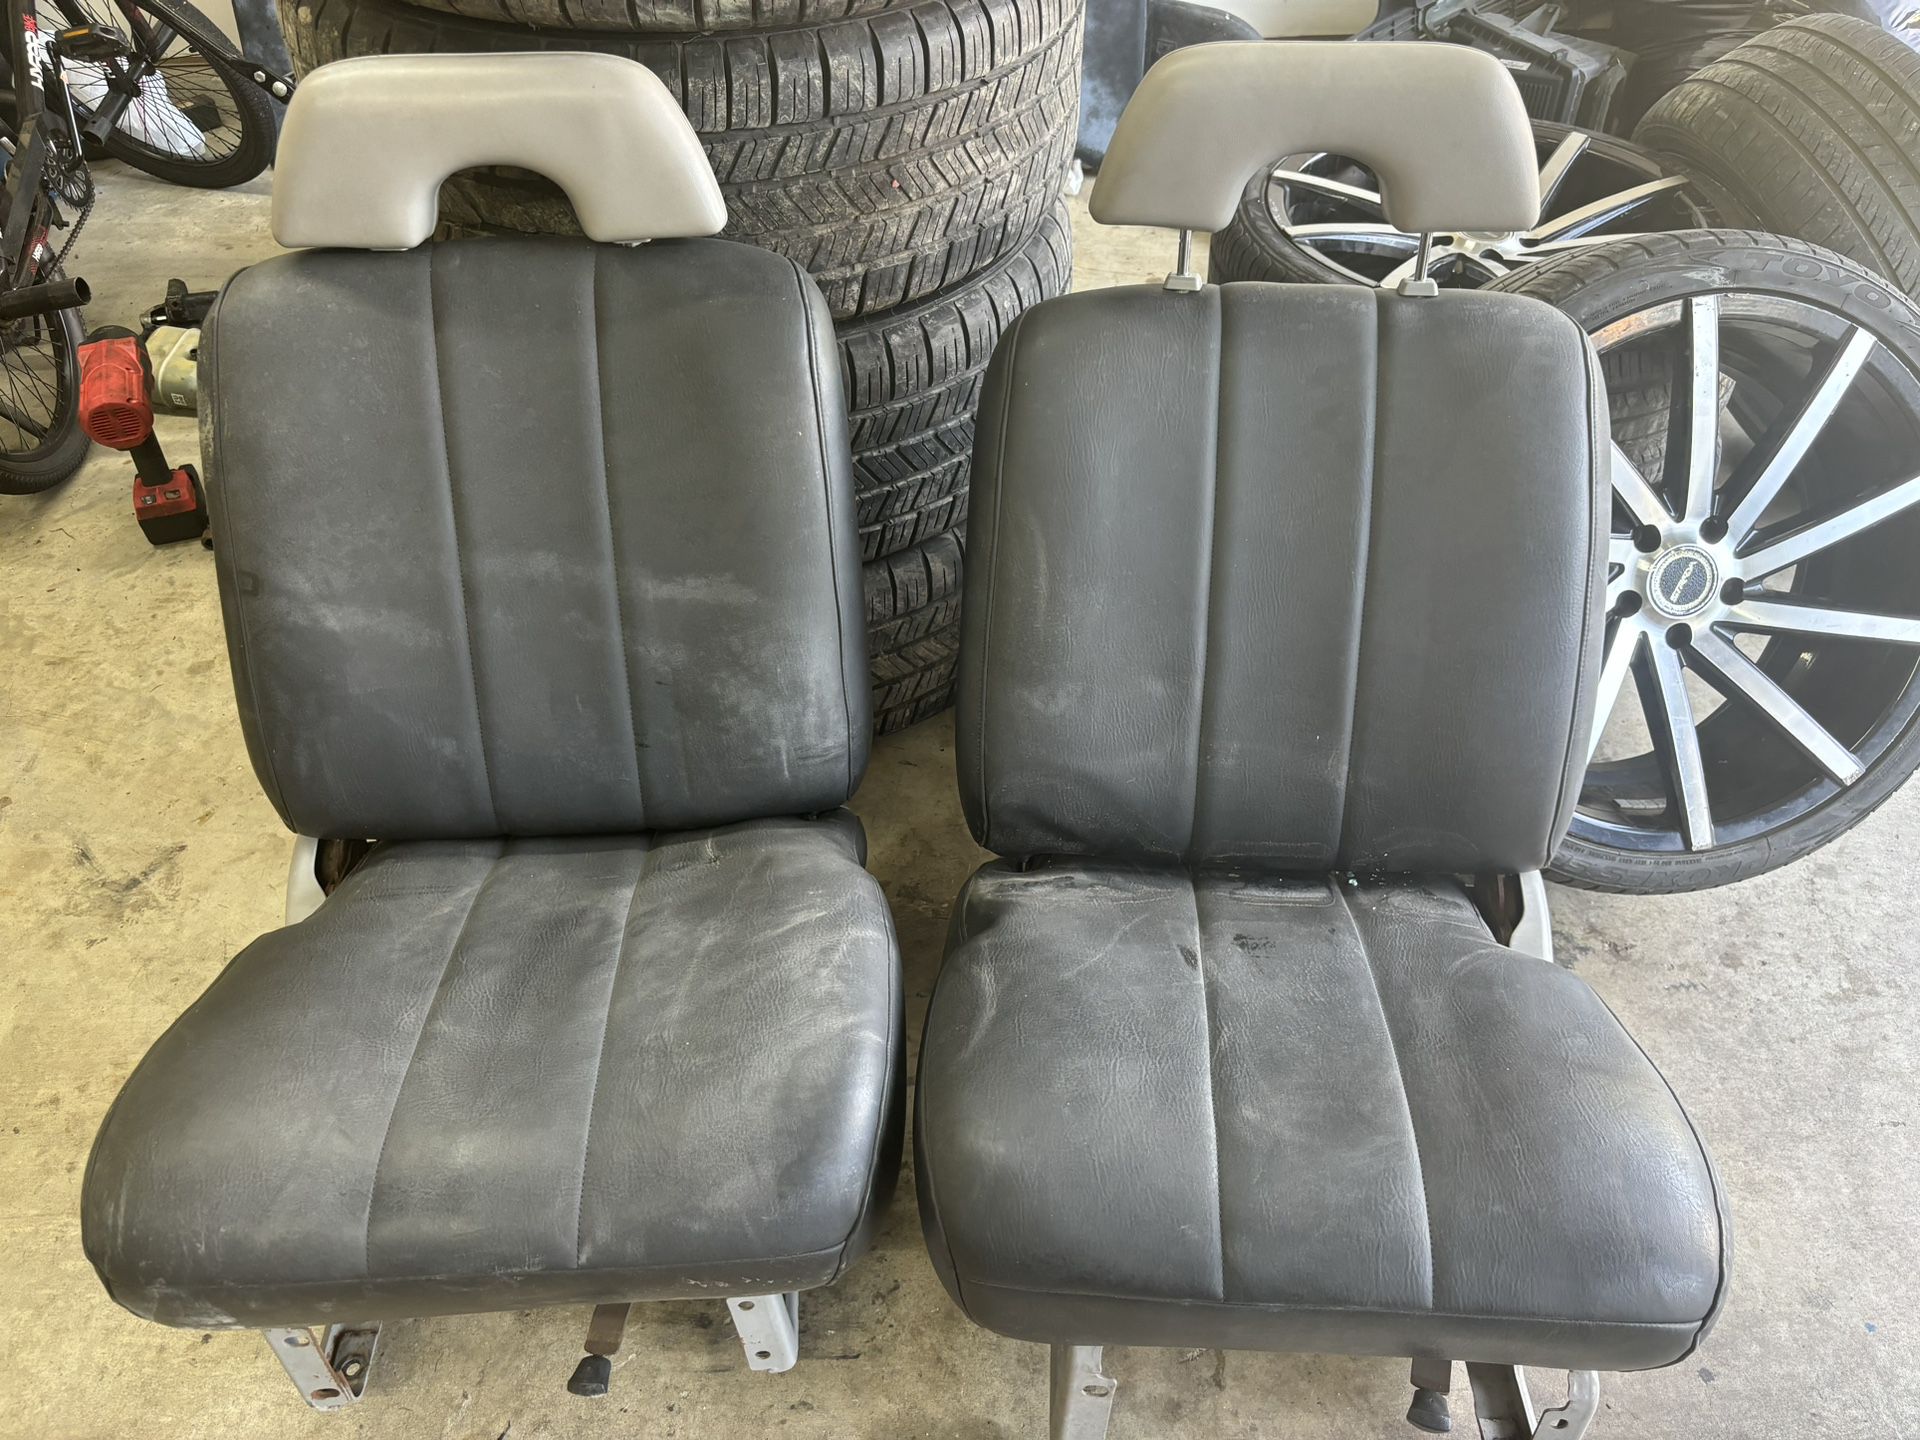 1989 Chevy OBS Seats